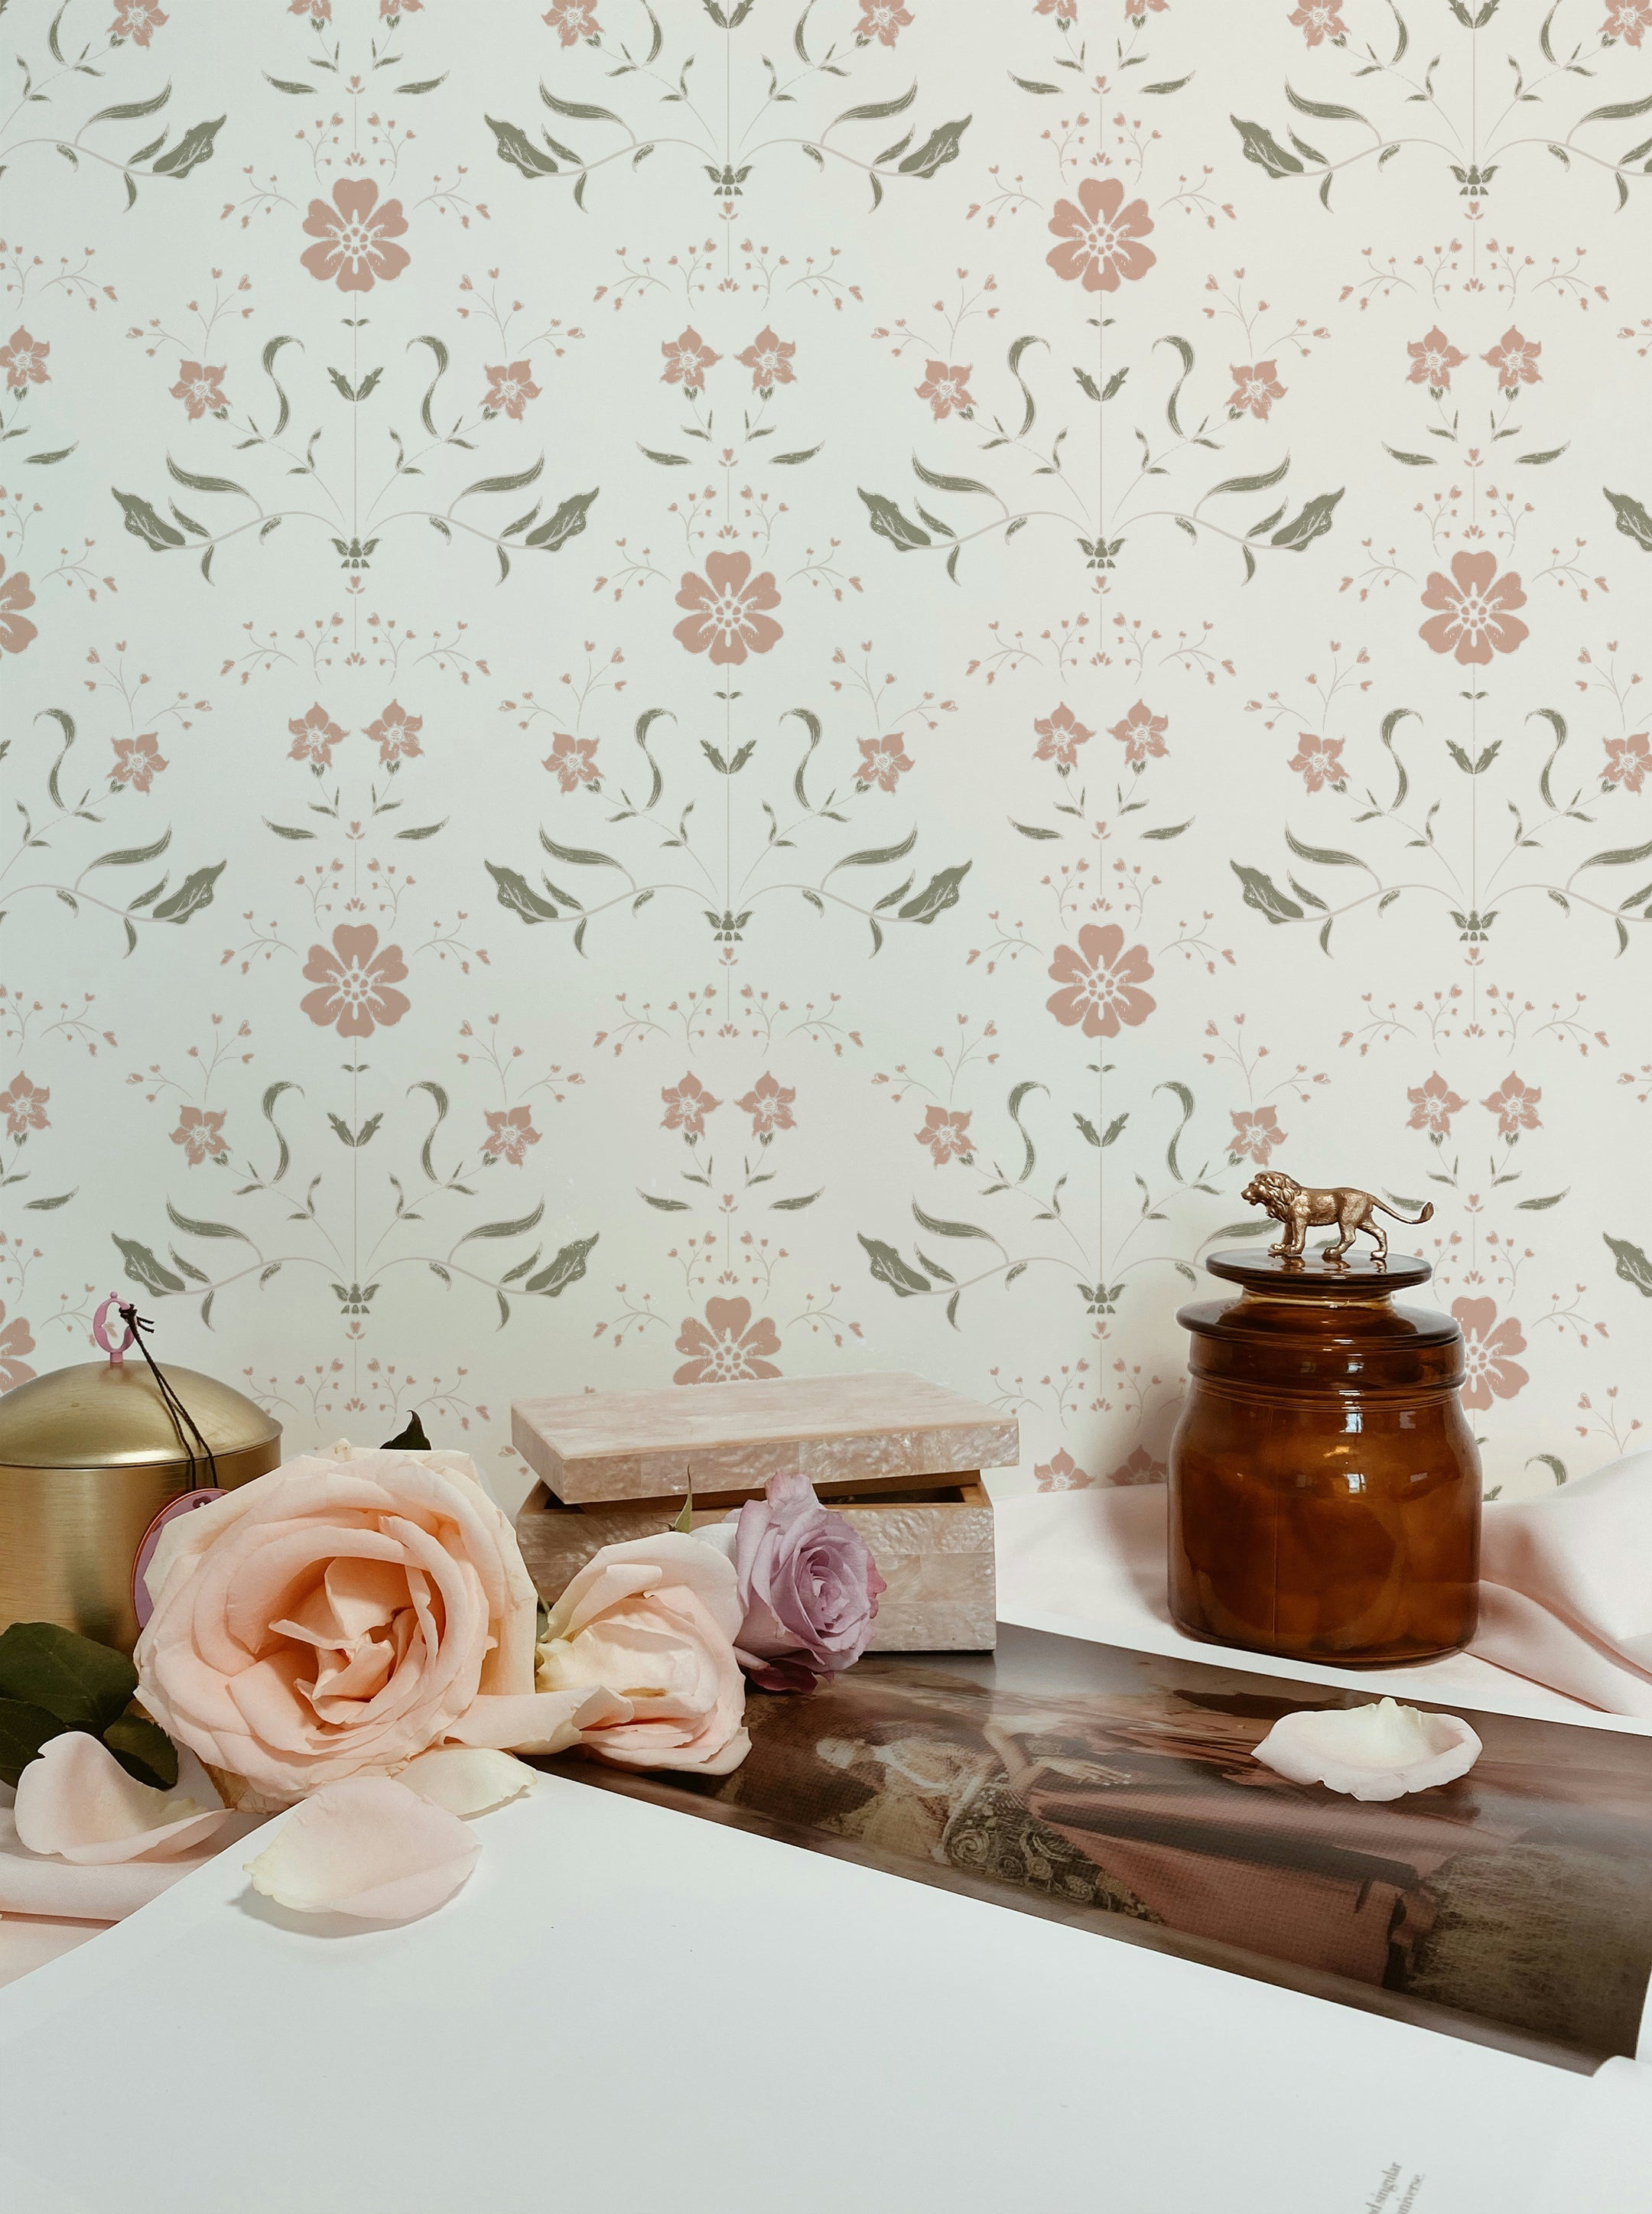 Elegant workspace setting featuring a vintage-style floral wallpaper with soft pink and green designs. The scene is decorated with fresh roses, a decorative box, and a vintage amber glass jar with a small elephant figurine on top, creating a charming and inviting atmosphere.